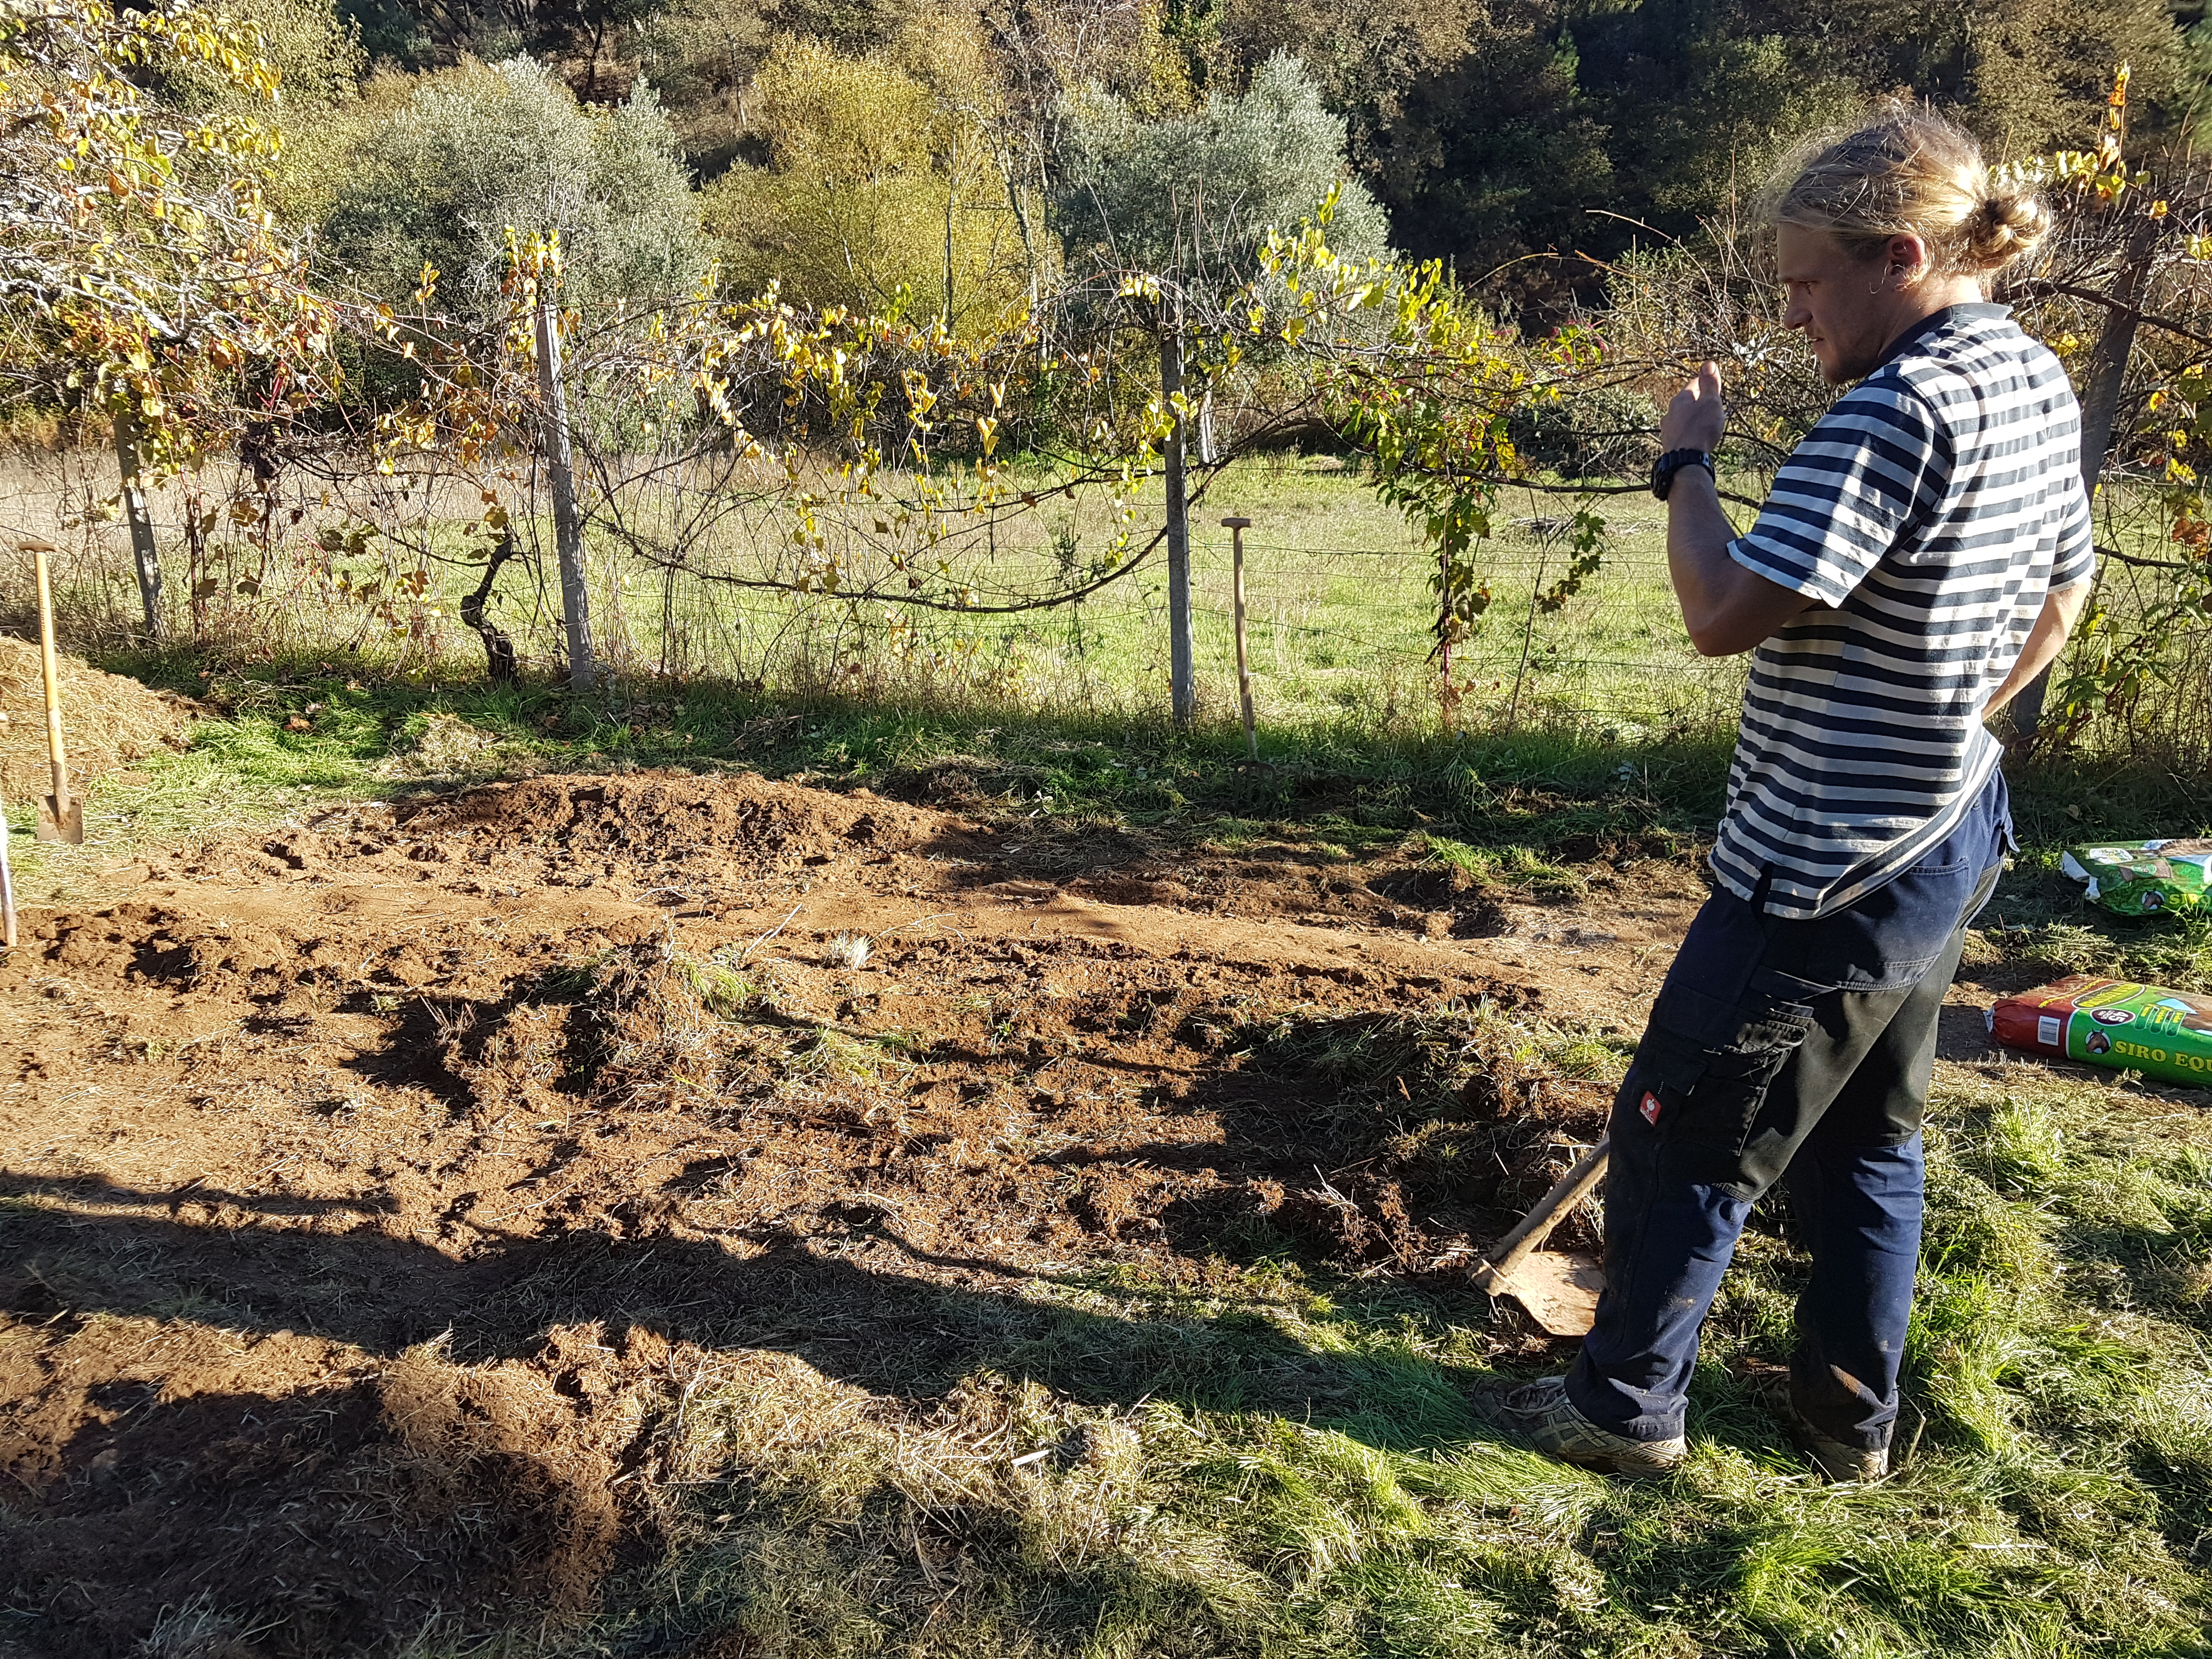 Nils pauses for a moment, unsure how to proceed. He still doubts whether we’re creating the best possible seedbed.